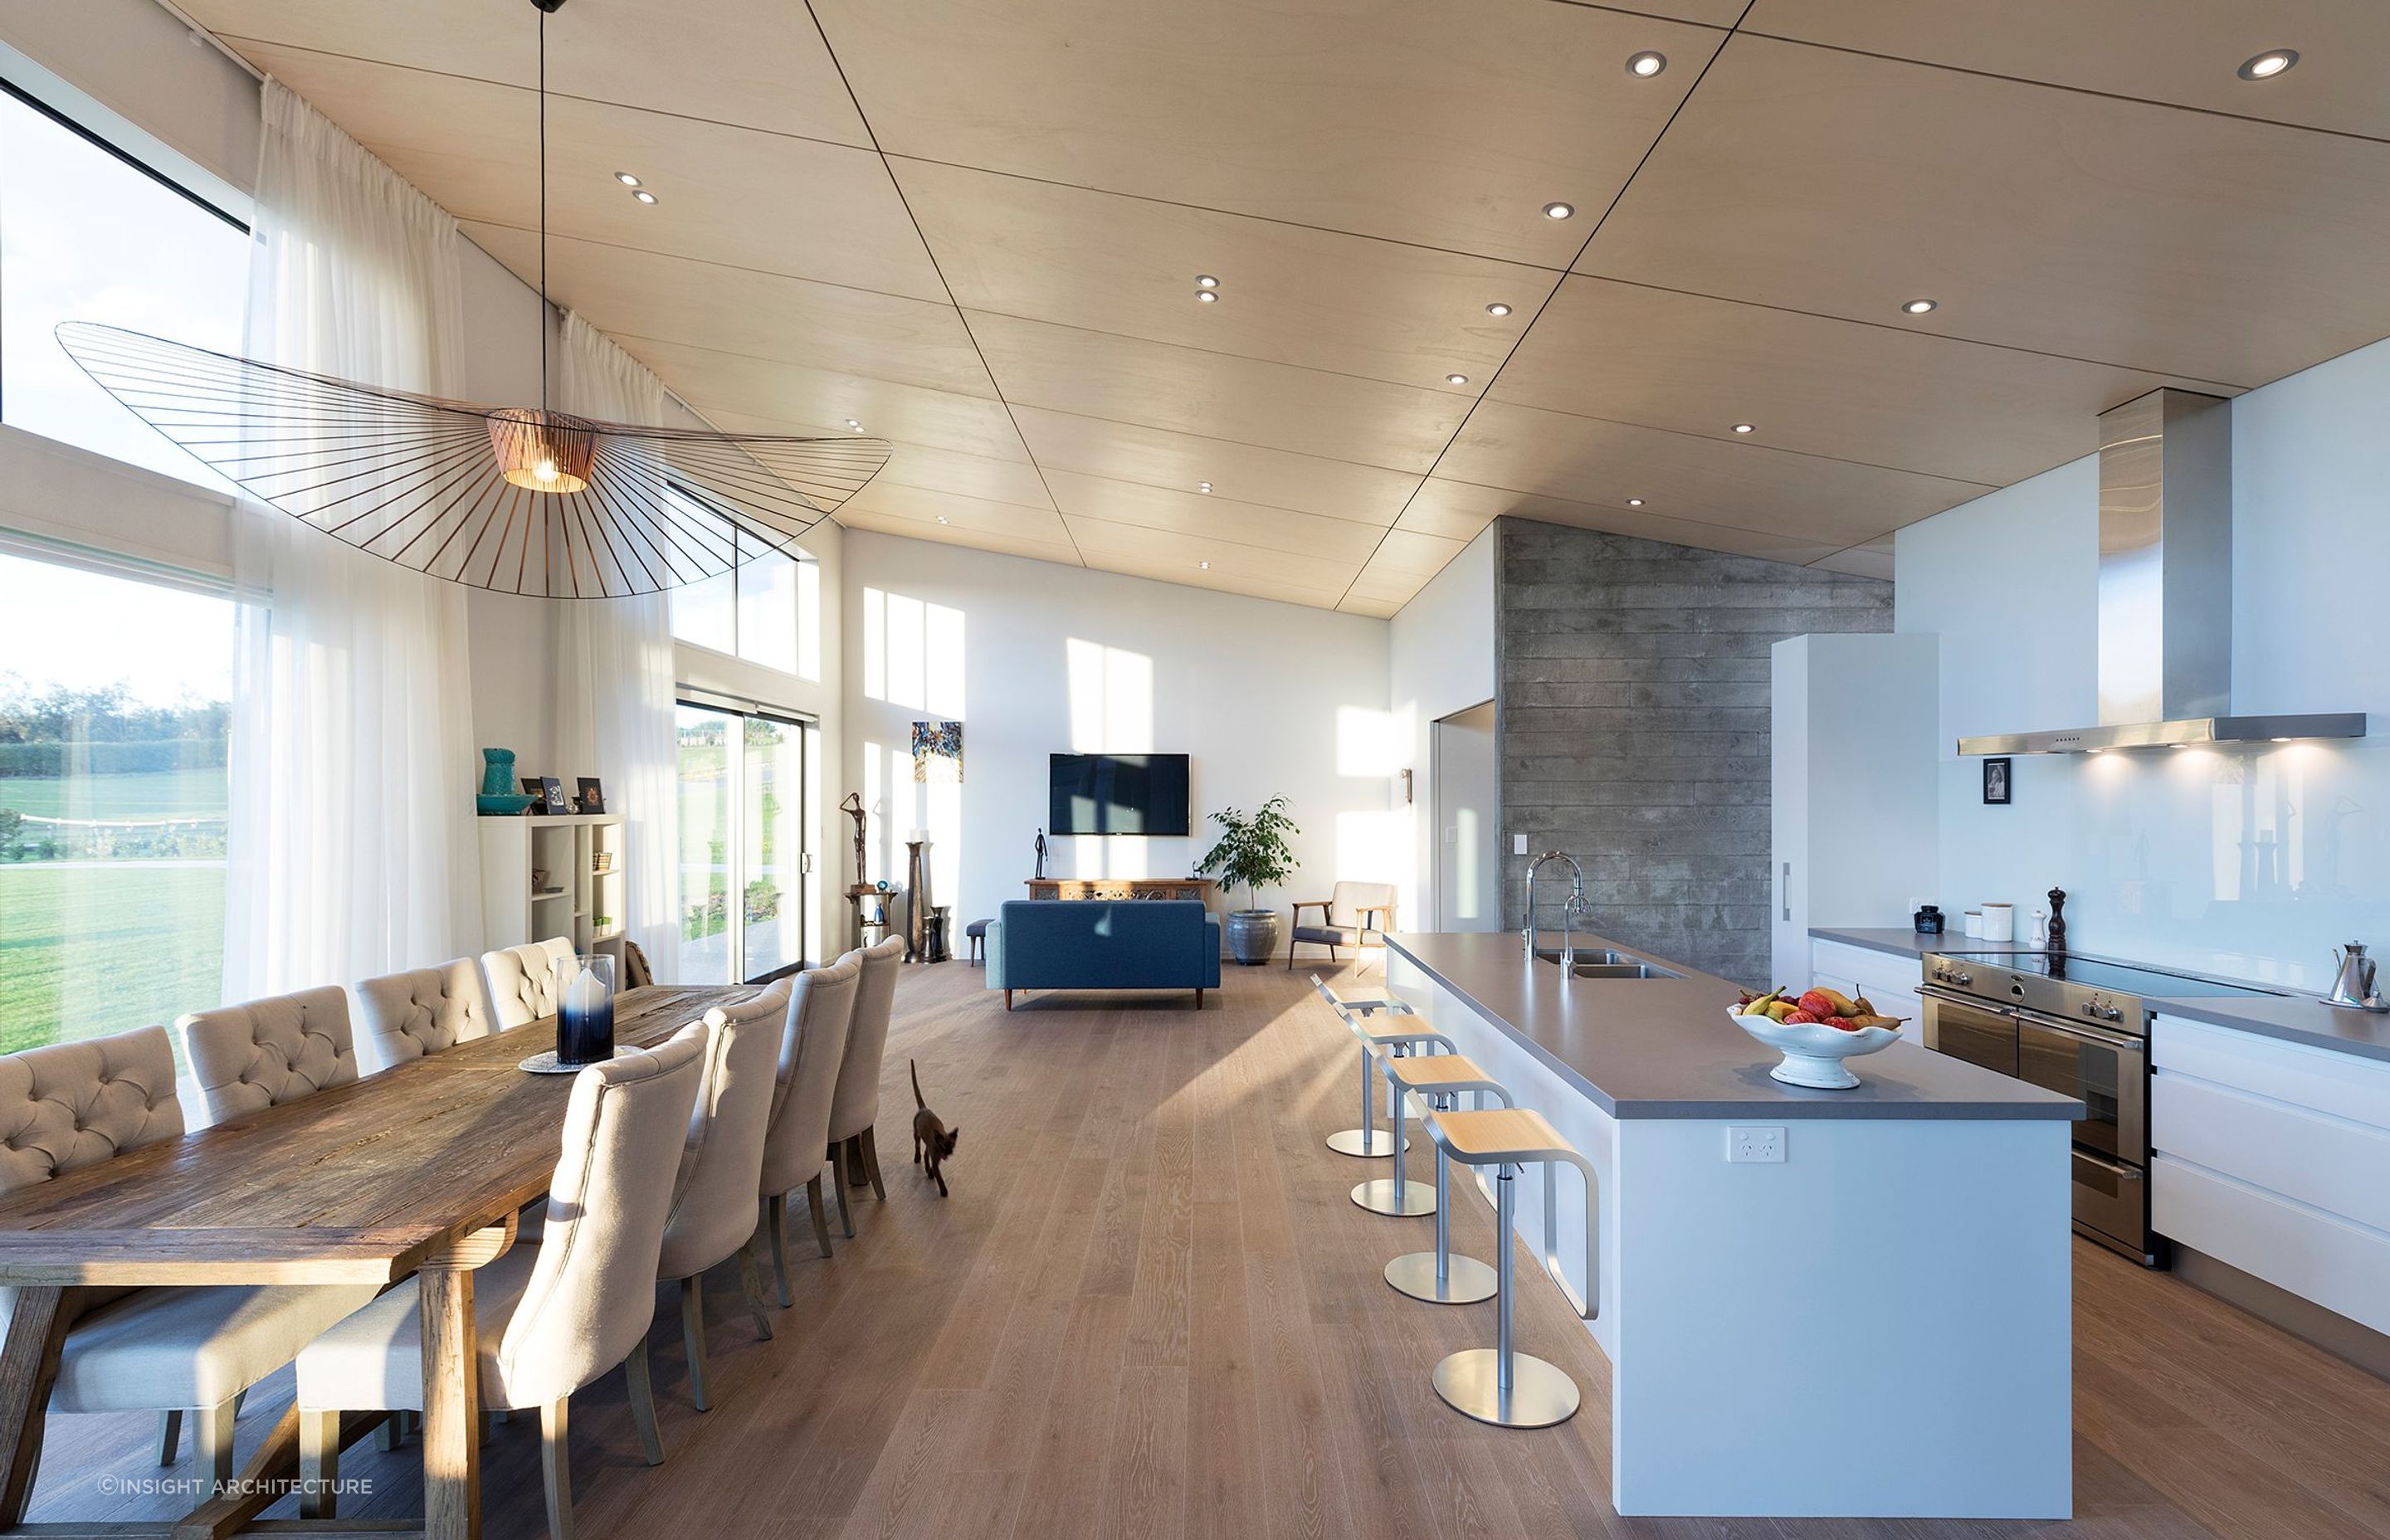 North-facing orientation helps the living spaces capture as much natural light as possible